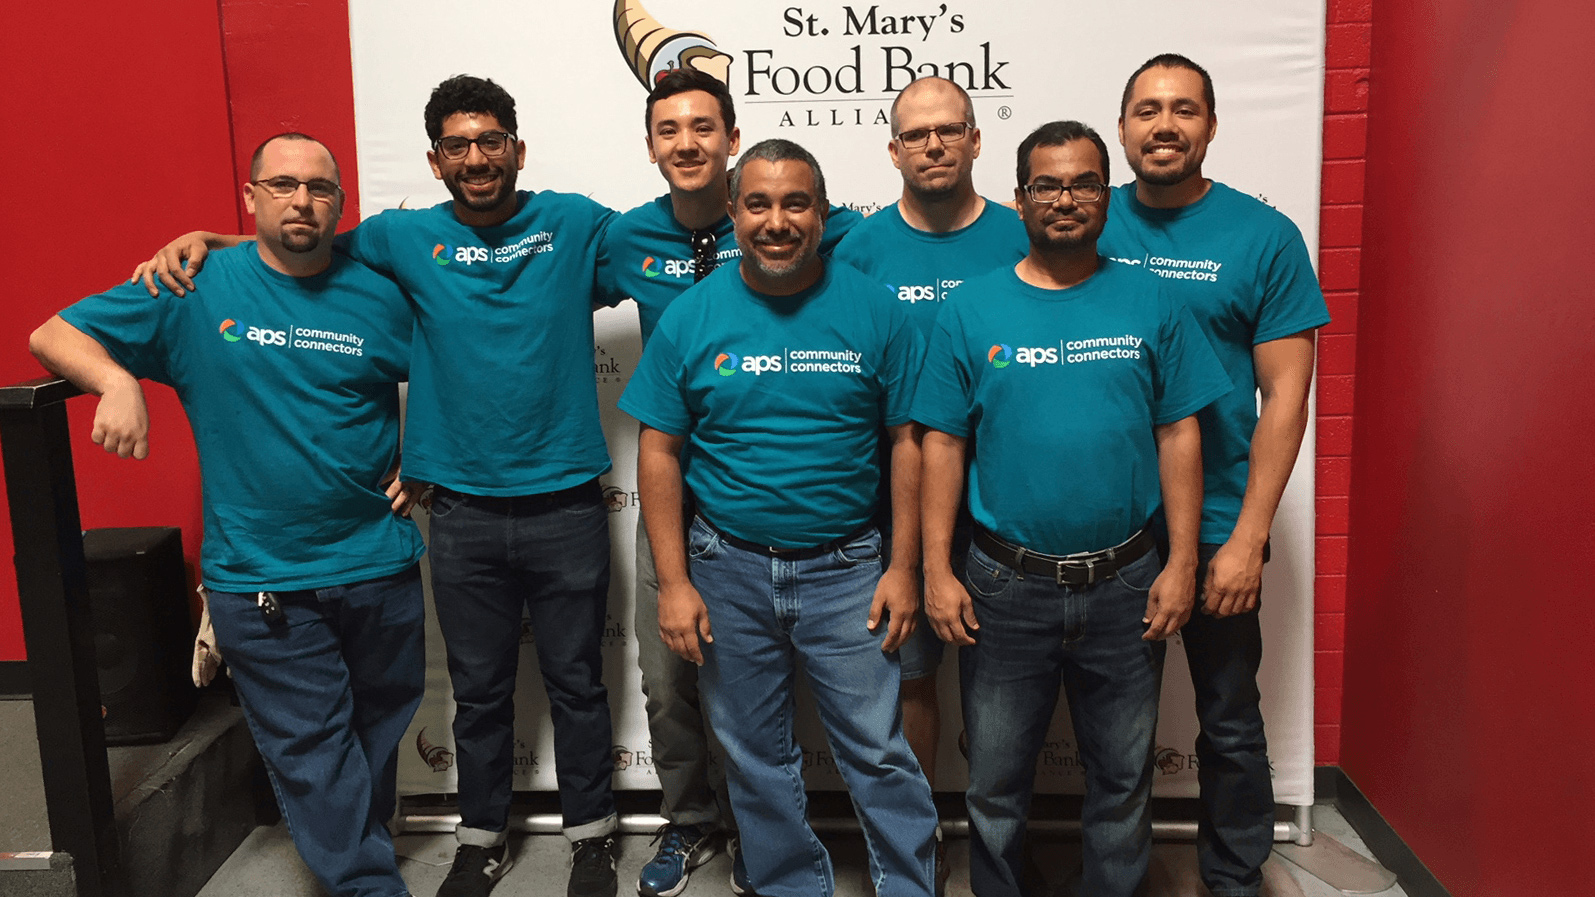 Group of APS employees volunteering at St. Mary's Food Bank.